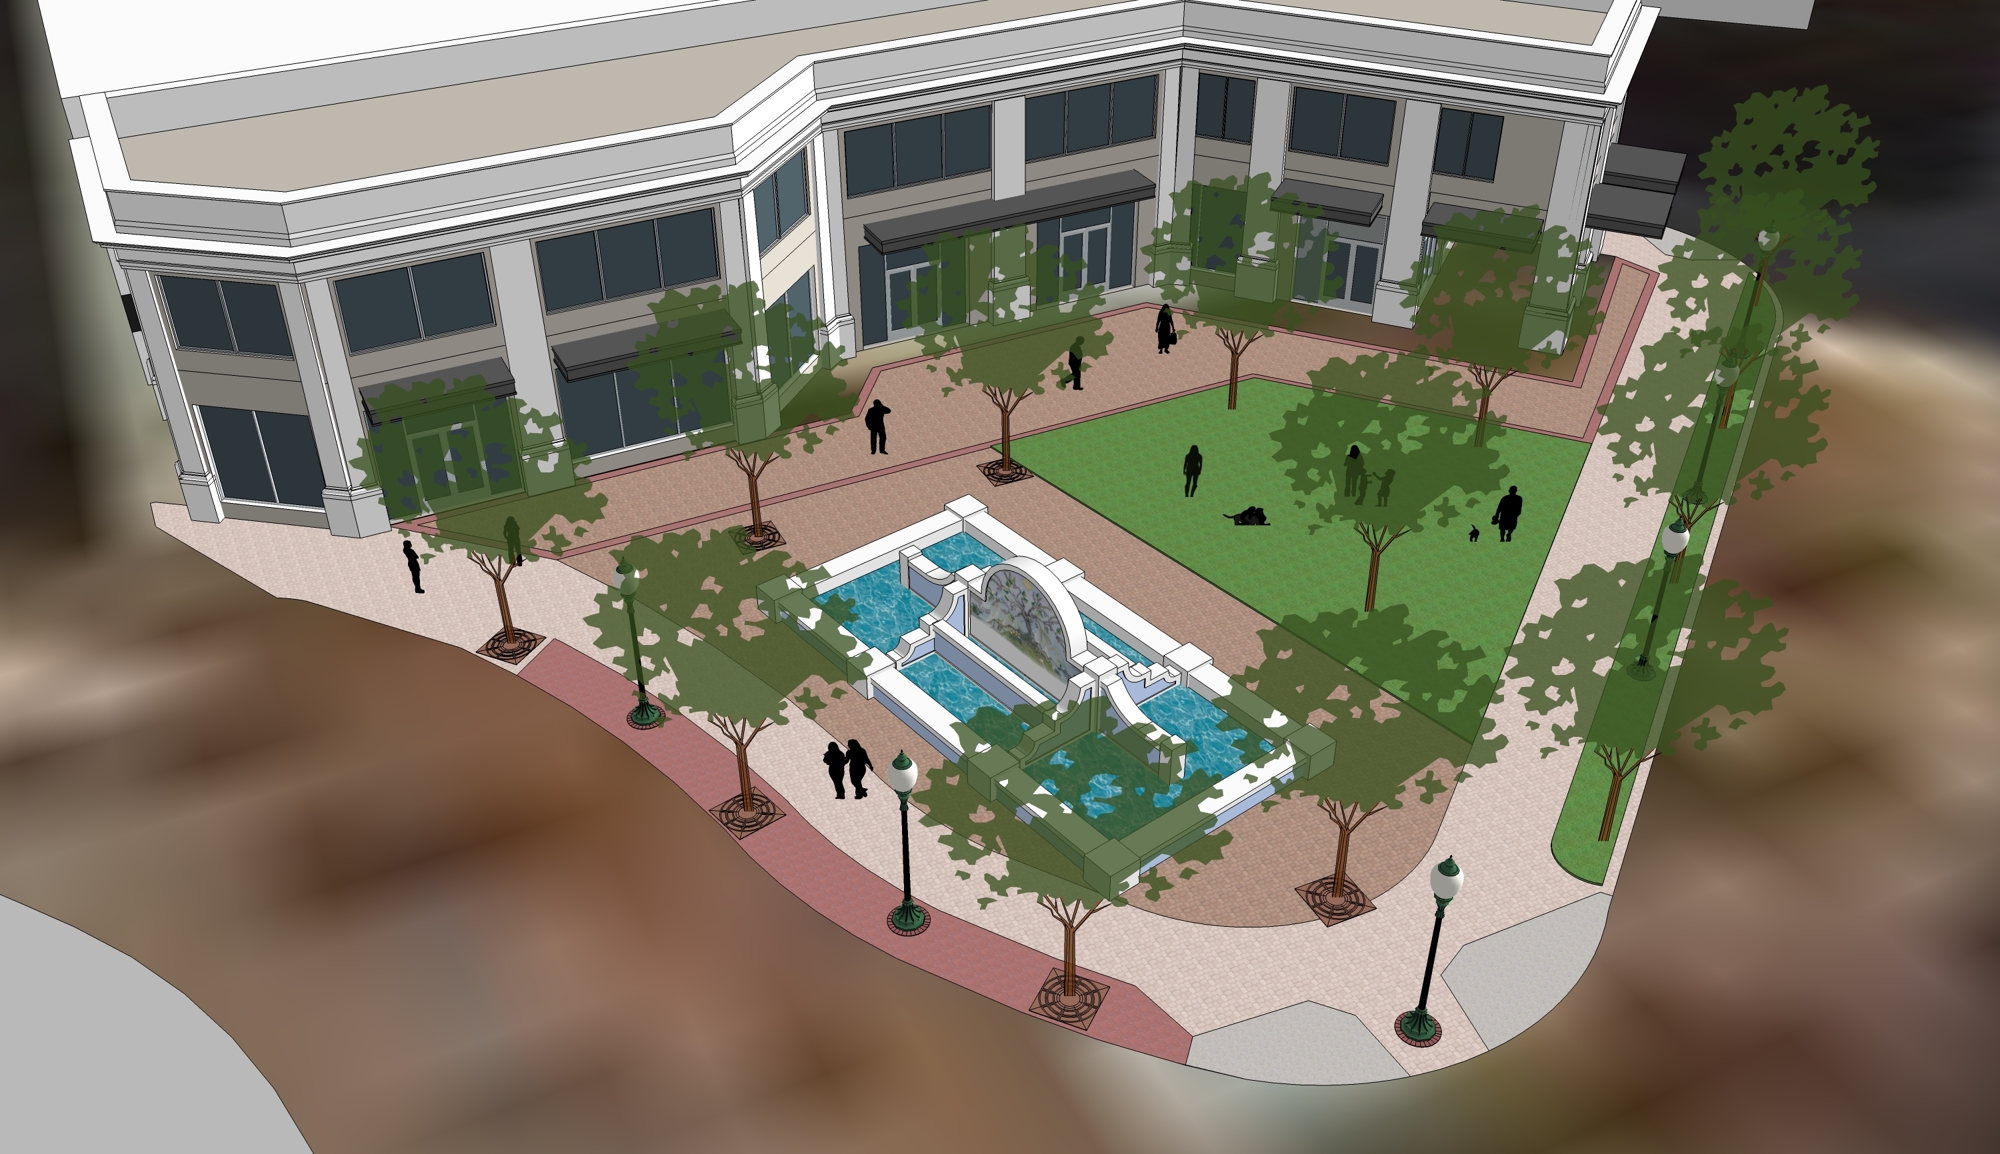 This conceptual rendering depicts the Pineapple Park and the proposed two-story structure, removing an existing raised planter and adding other landscaping features.